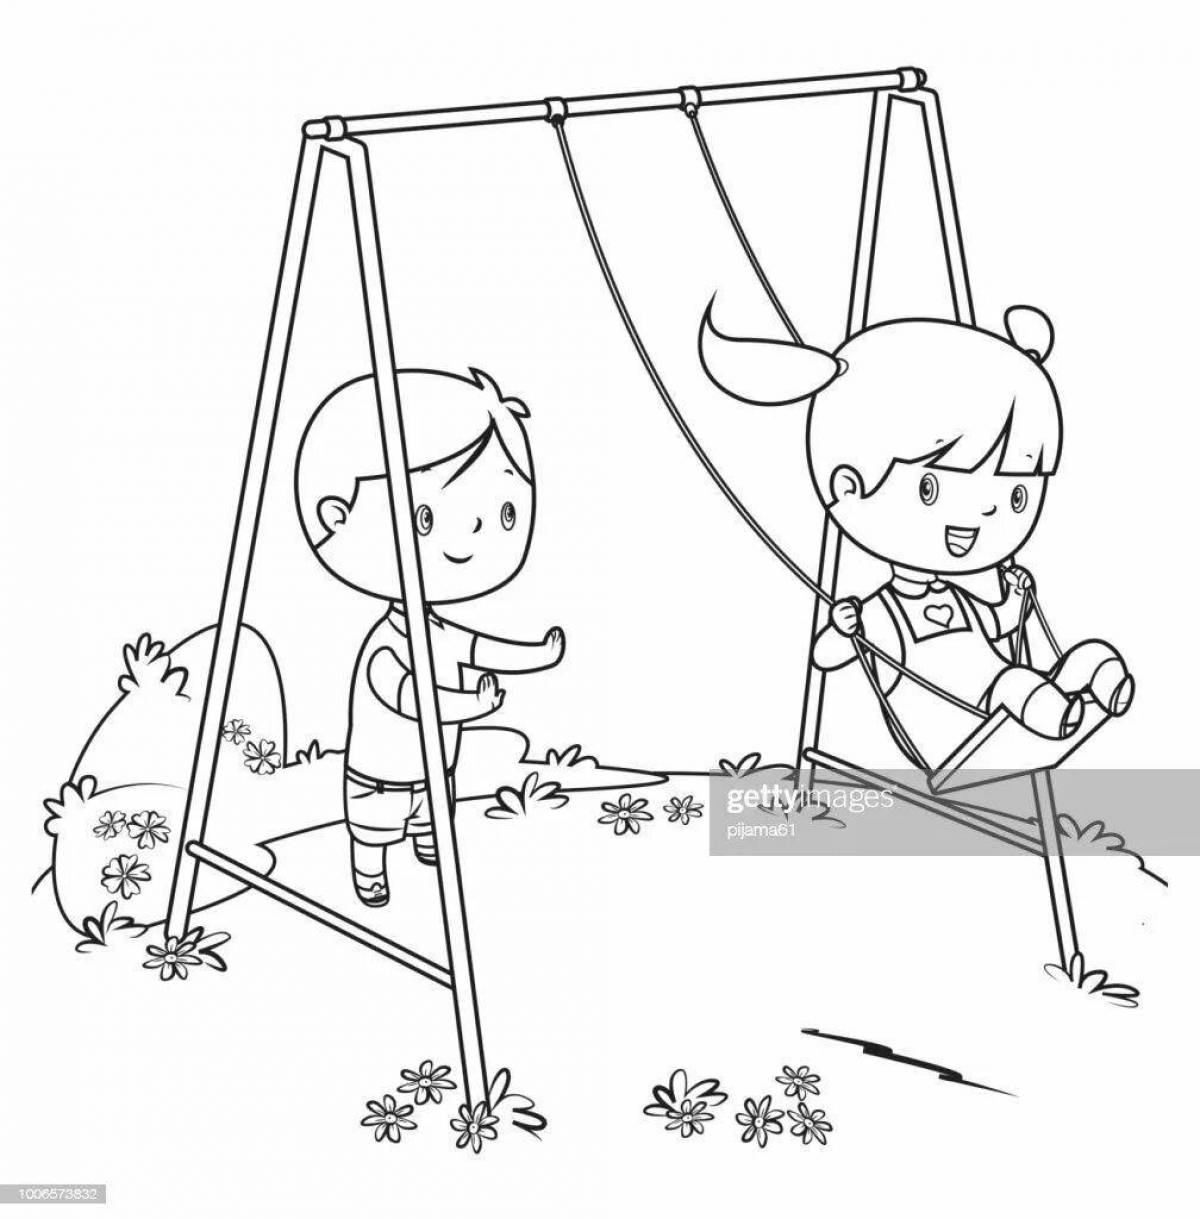 Playful swing coloring page for toddlers